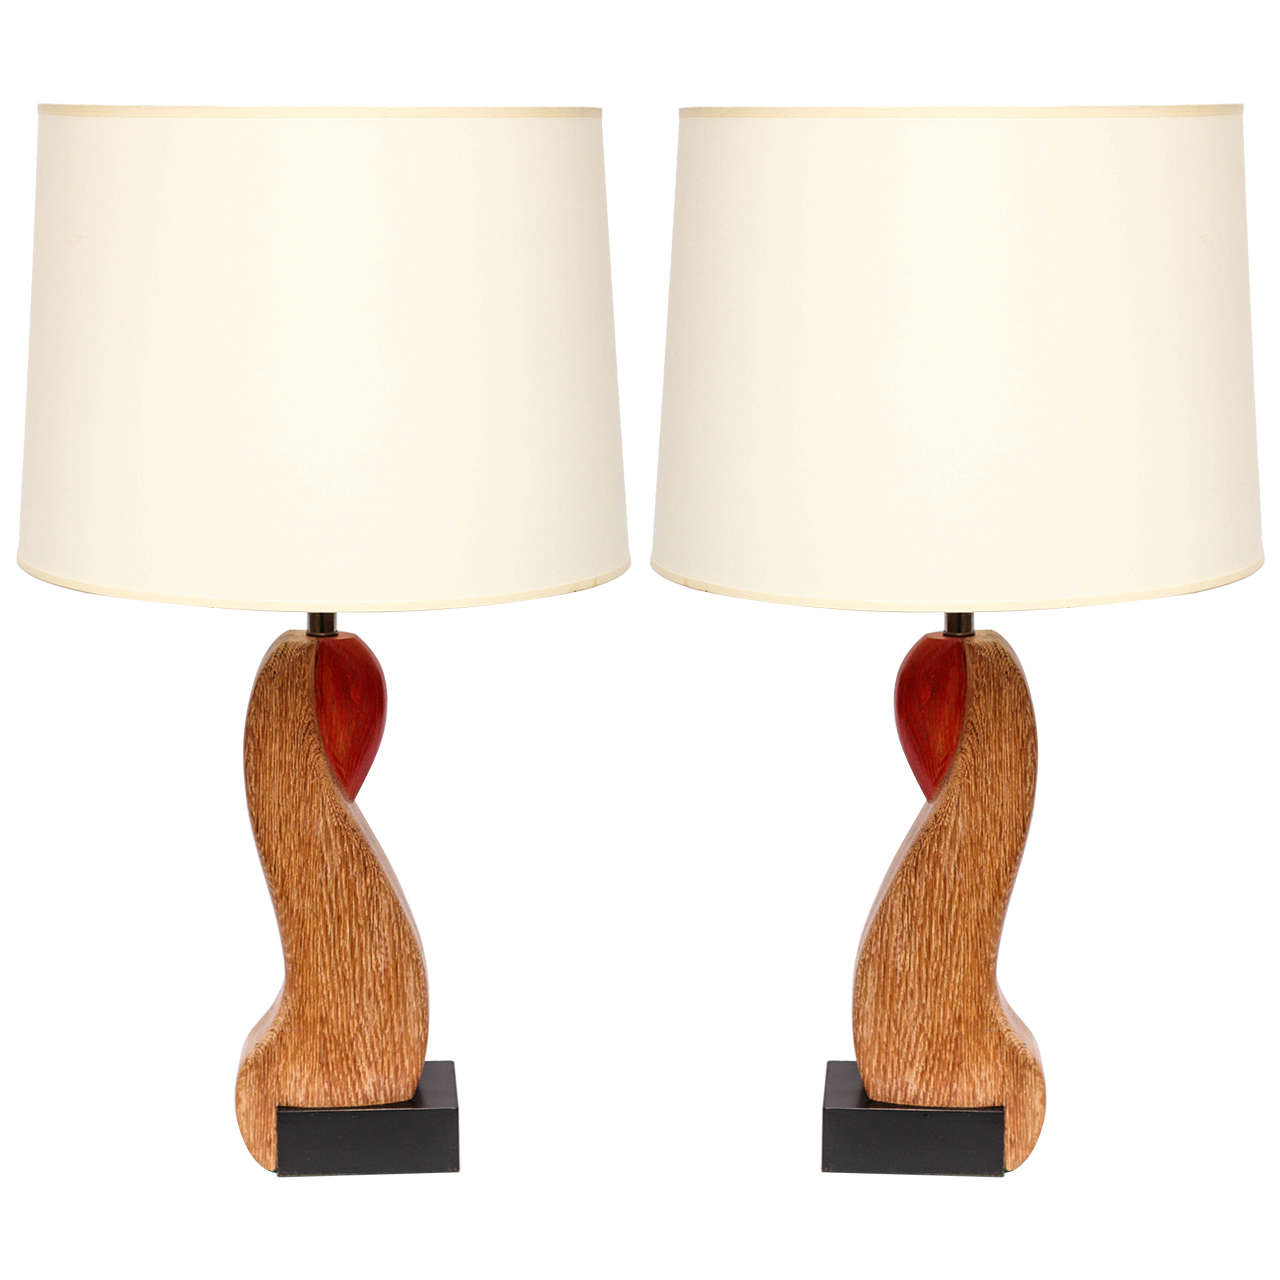  Table Lamps Pair Mid Century Modern Sculptural form wood America 1940's For Sale